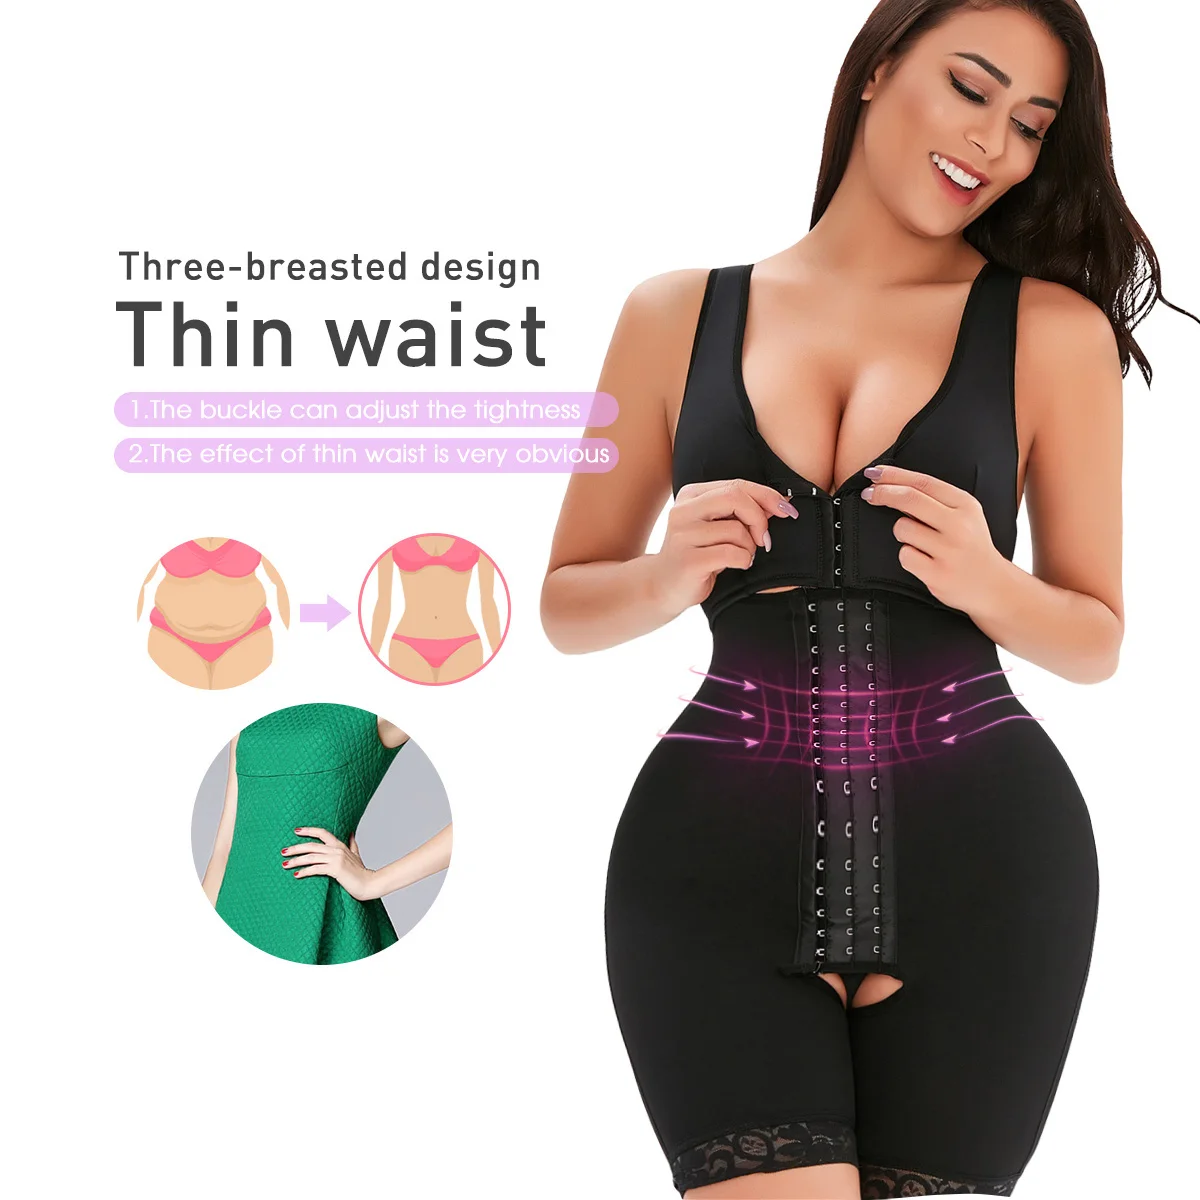 

Women's slimming fajas body shaping weight loss Shape wear compression garment for liposuction, Black,nude